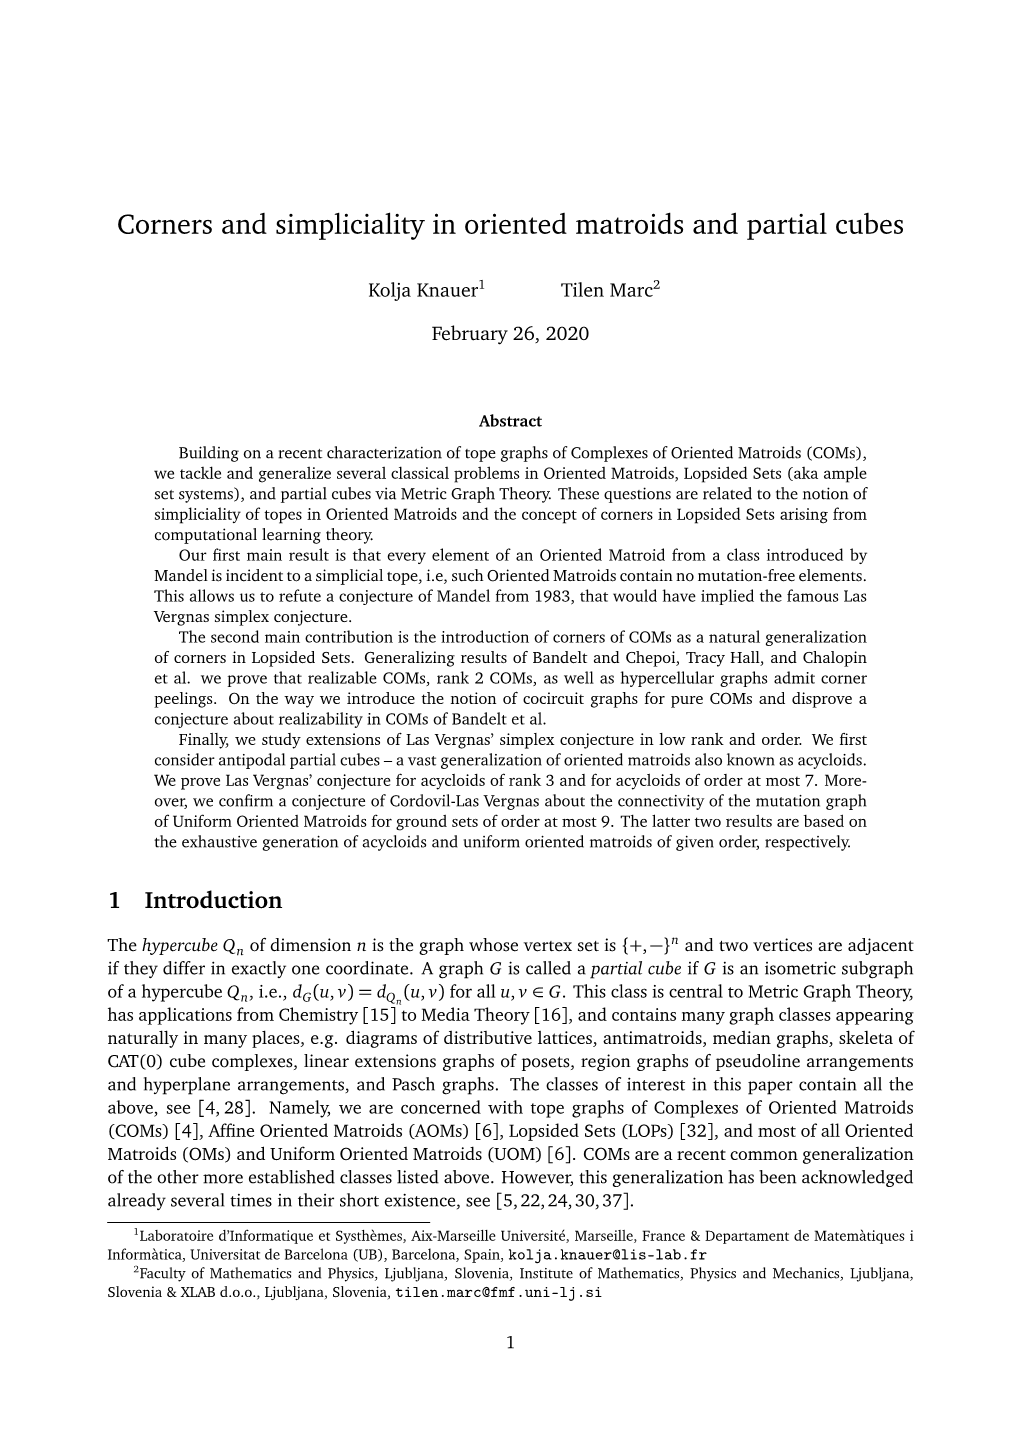 Corners and Simpliciality in Oriented Matroids and Partial Cubes